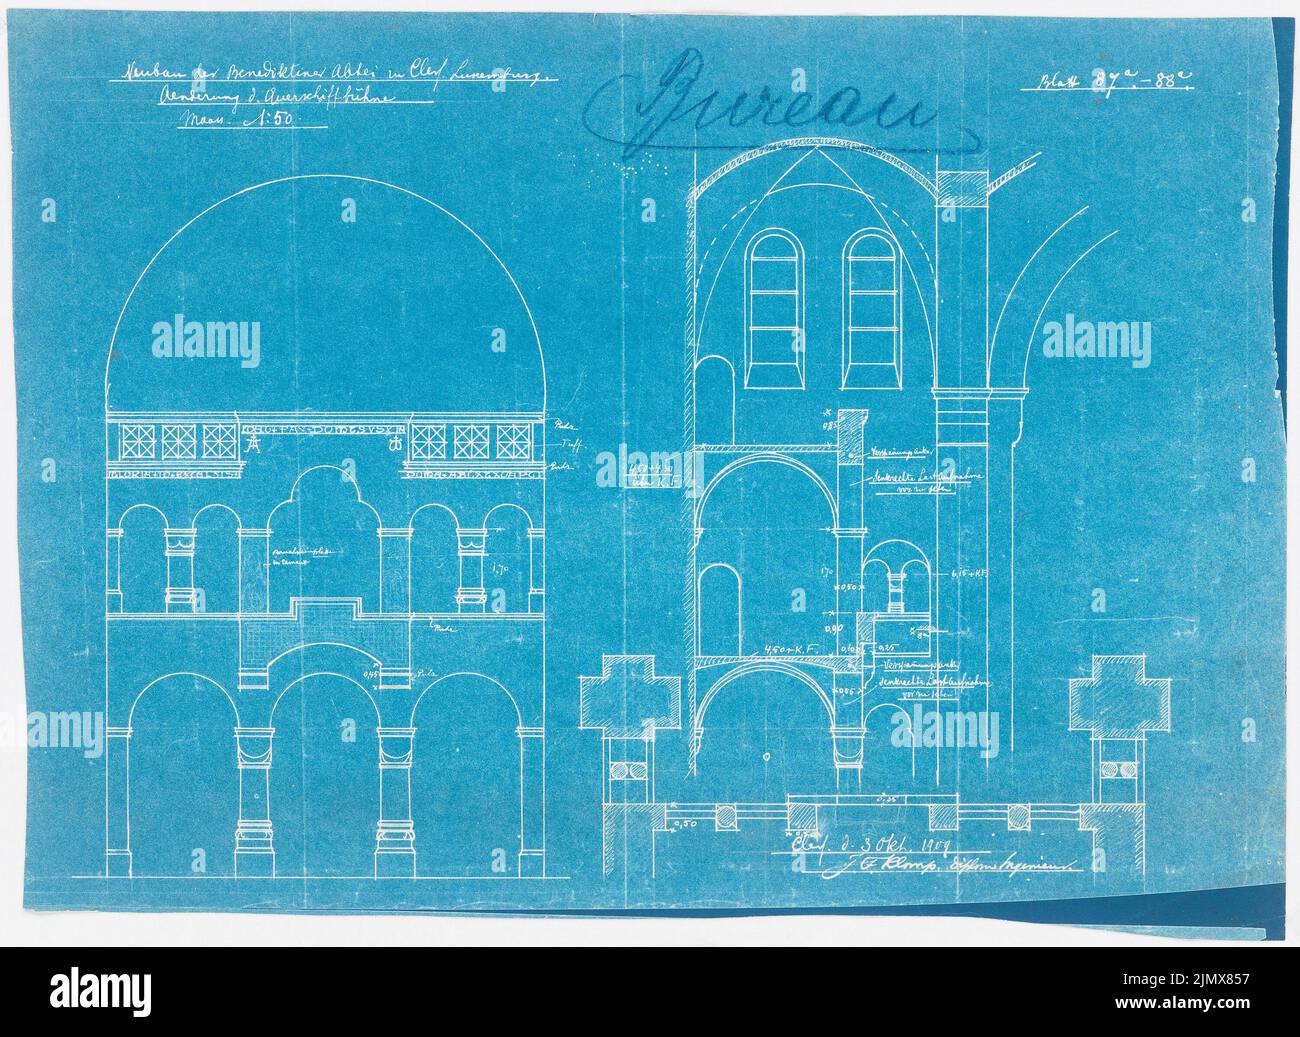 Klomp Johannes Franziskus (1865-1946), Benedectine Abbey St. Mauritius, Clerf (Cllervaux), Luxembourg (03.10.1909): Change of cross-nave stage, floor plan, view and cut 1:50. Blueprint on paper, 38.3 x 52.5 cm (including scan edges) Klomp Johannes Franziskus  (1865-1946): Benedektinerabtei St. Mauritius, Clerf (Clervaux) Stock Photo